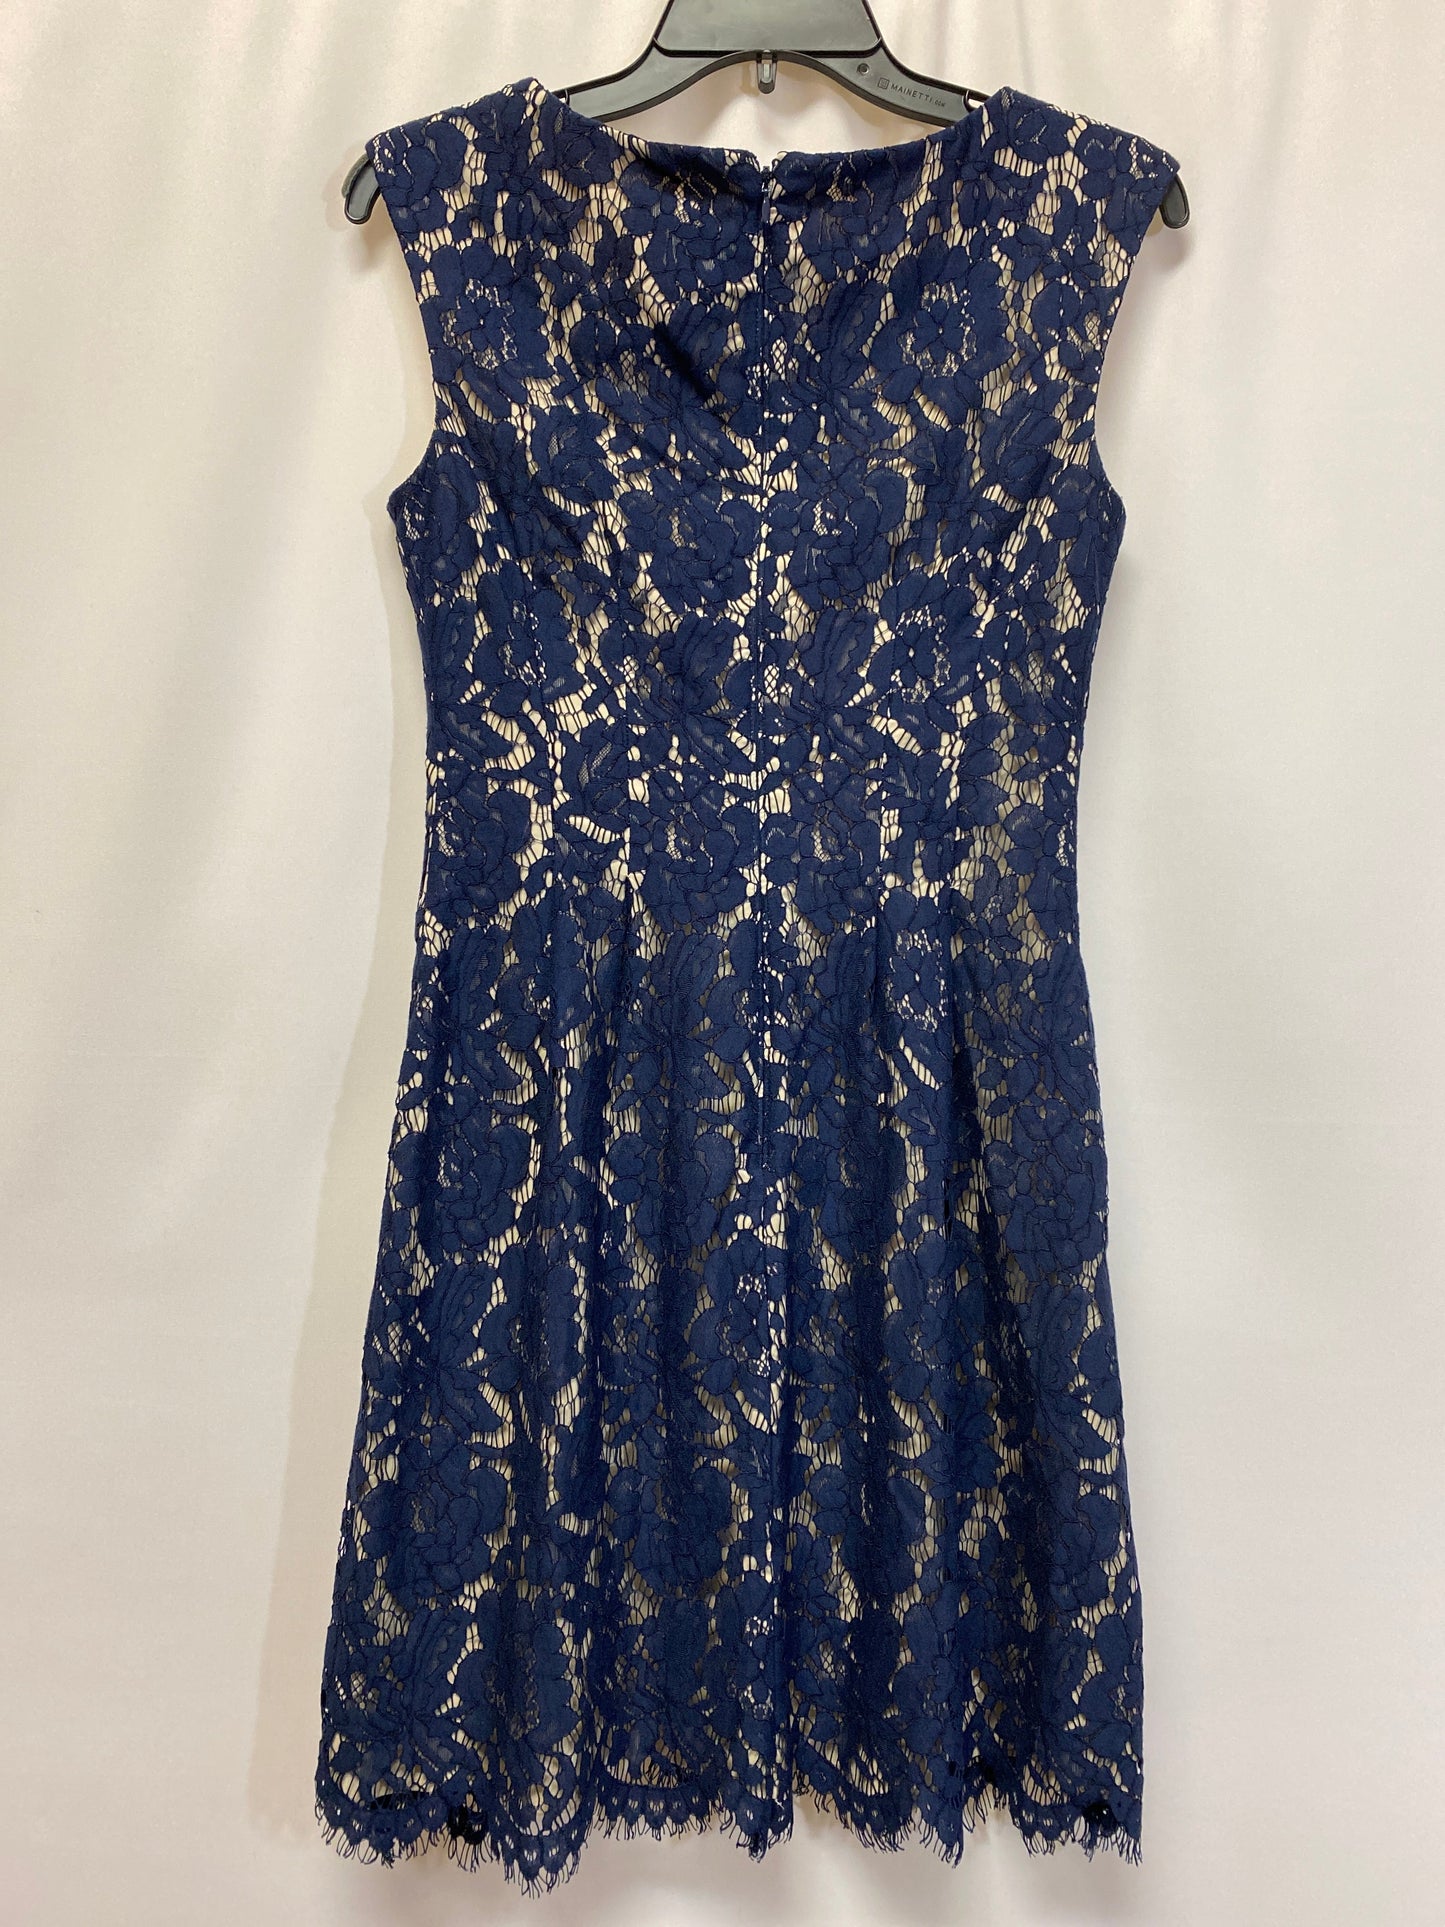 Blue Dress Casual Midi Vince Camuto, Size Xs